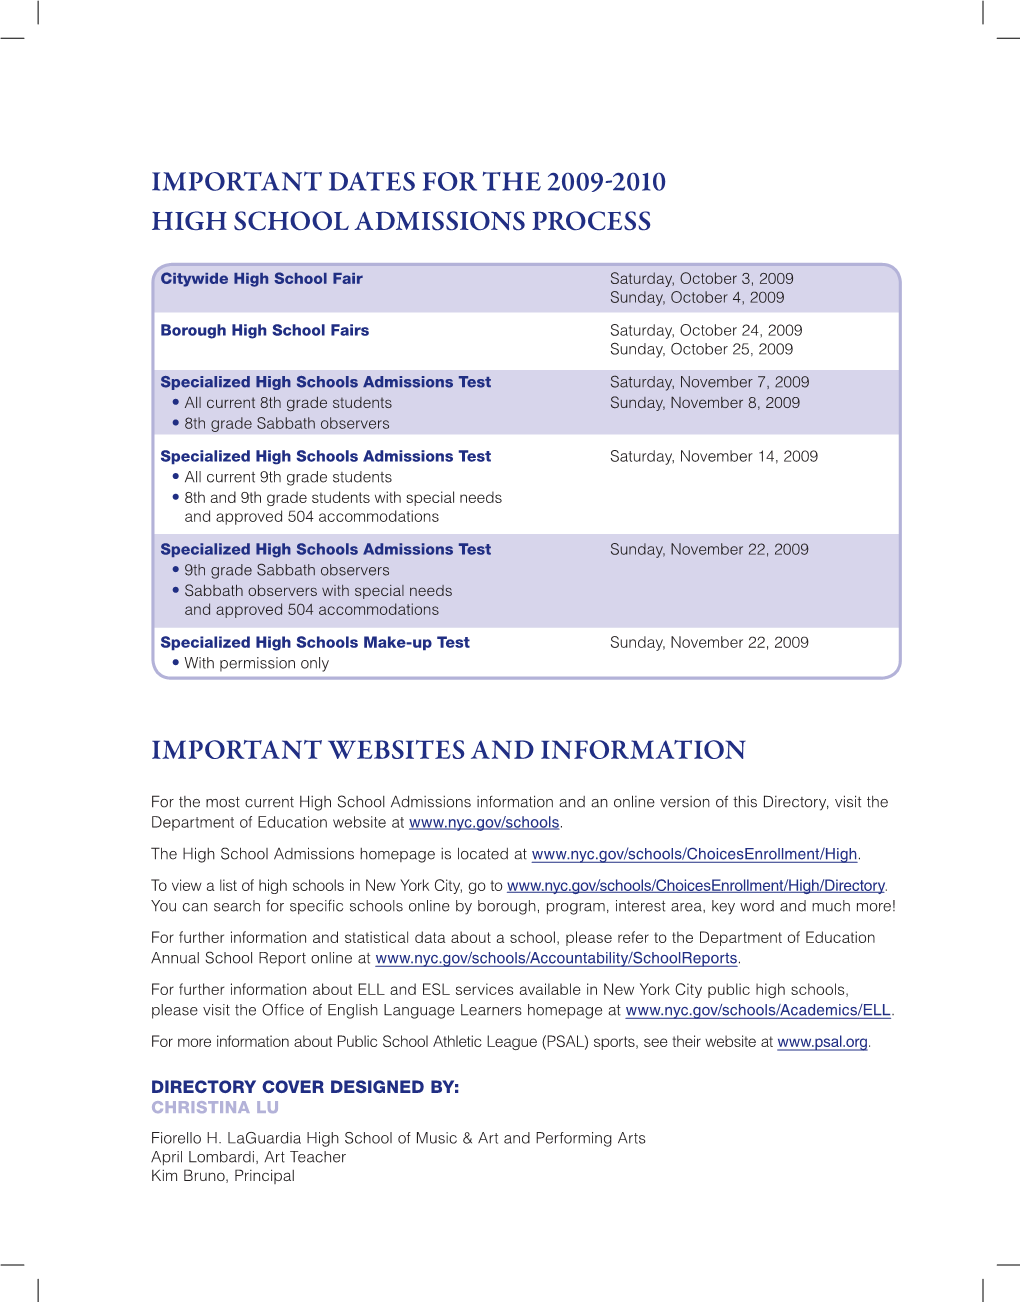 Important Dates for the 2009-2010 High School Admissions Process